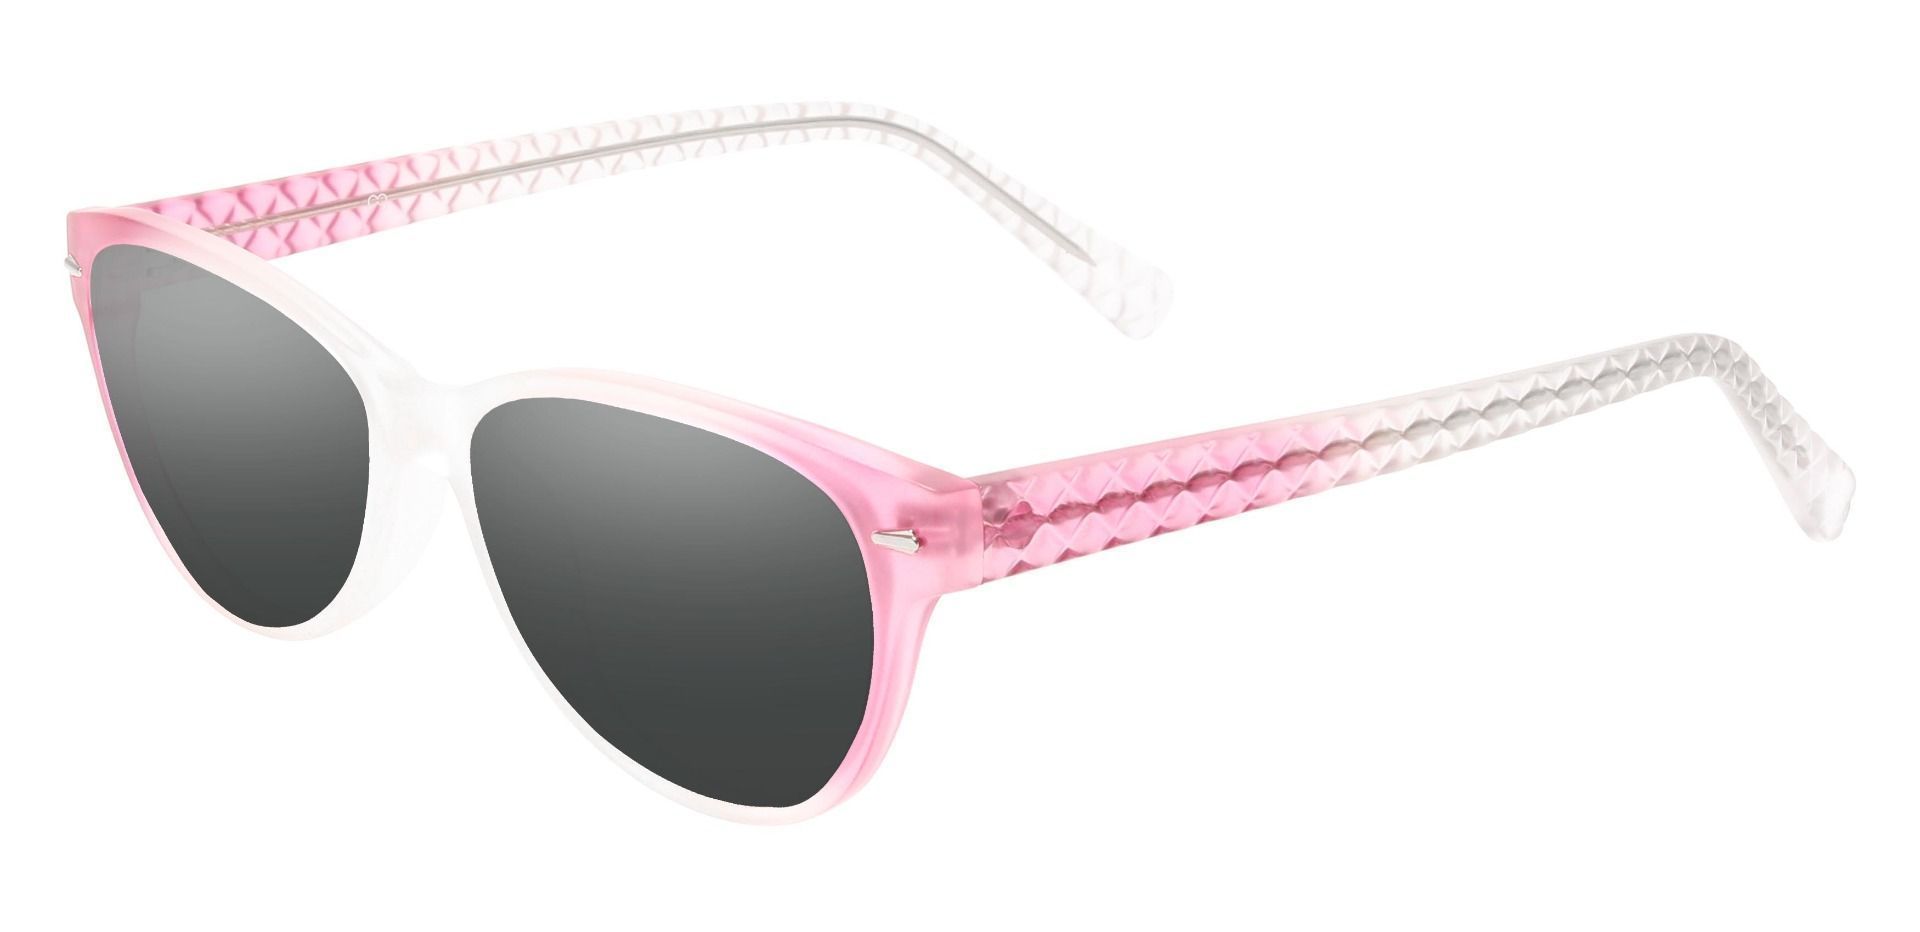 Olive Cat Eye Lined Bifocal Sunglasses - Pink Frame With Gray Lenses